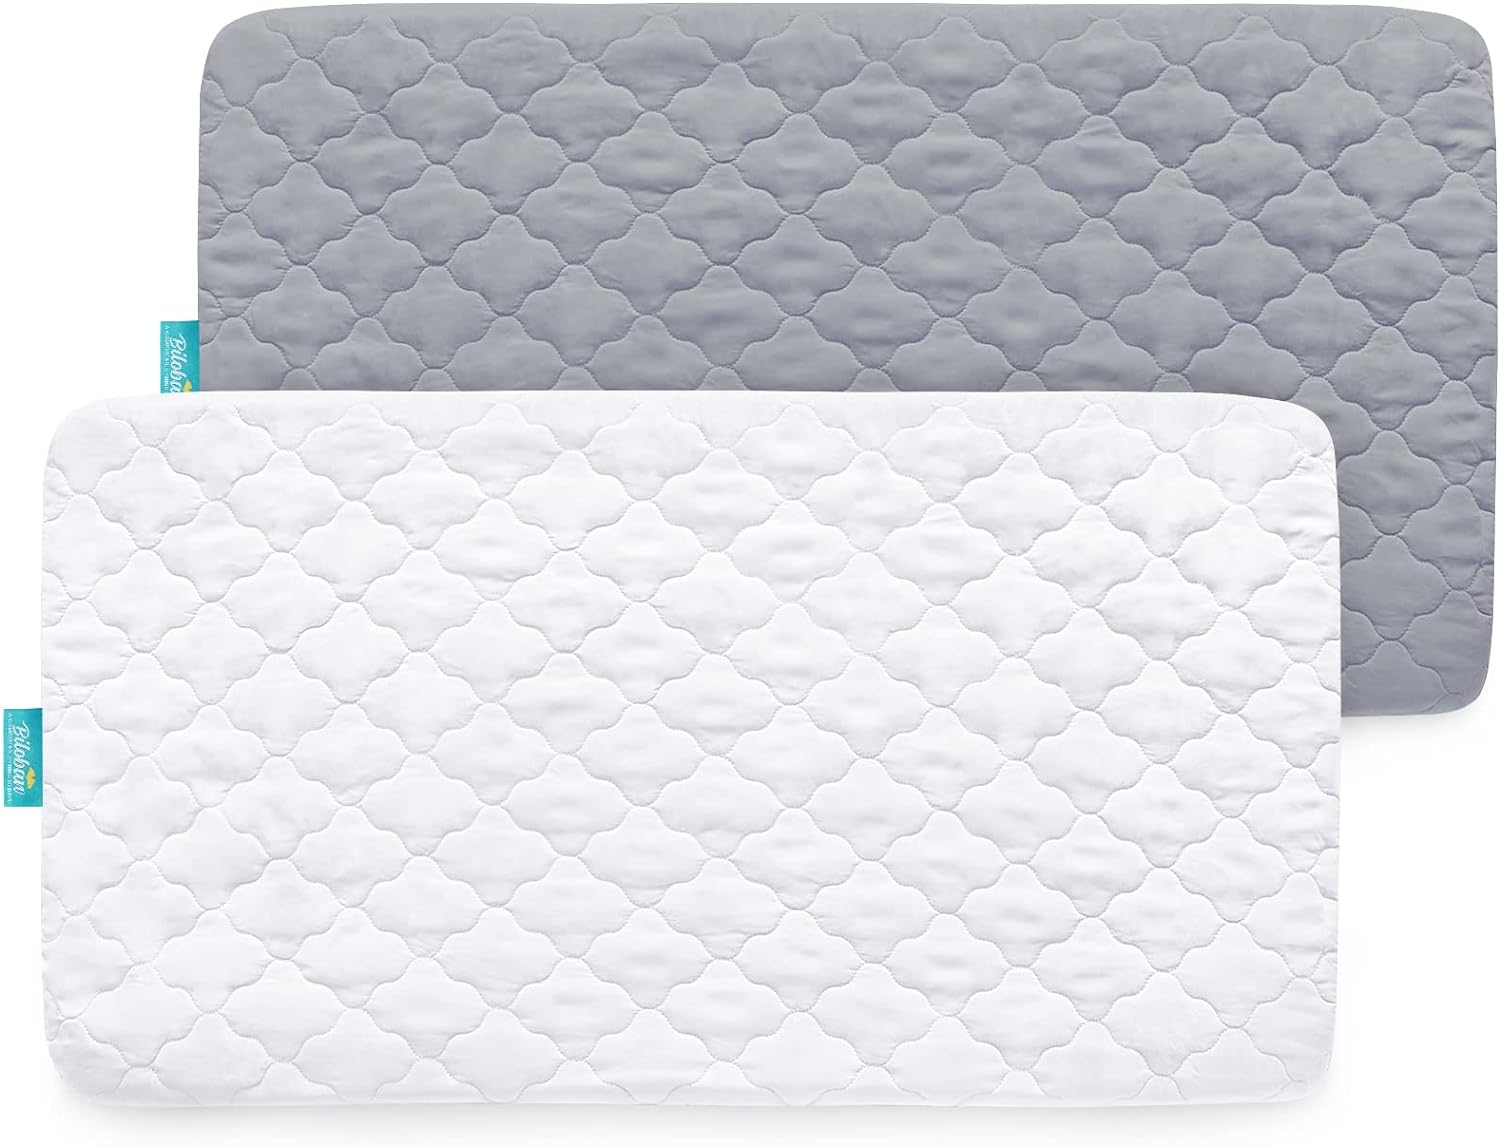 Crib Mattress Protector/ Pad Cover - 2 Pack, Ultra Soft Microfiber, Waterproof (for Standard Crib/ Toddler Bed), Grey & White - Biloban Online Store